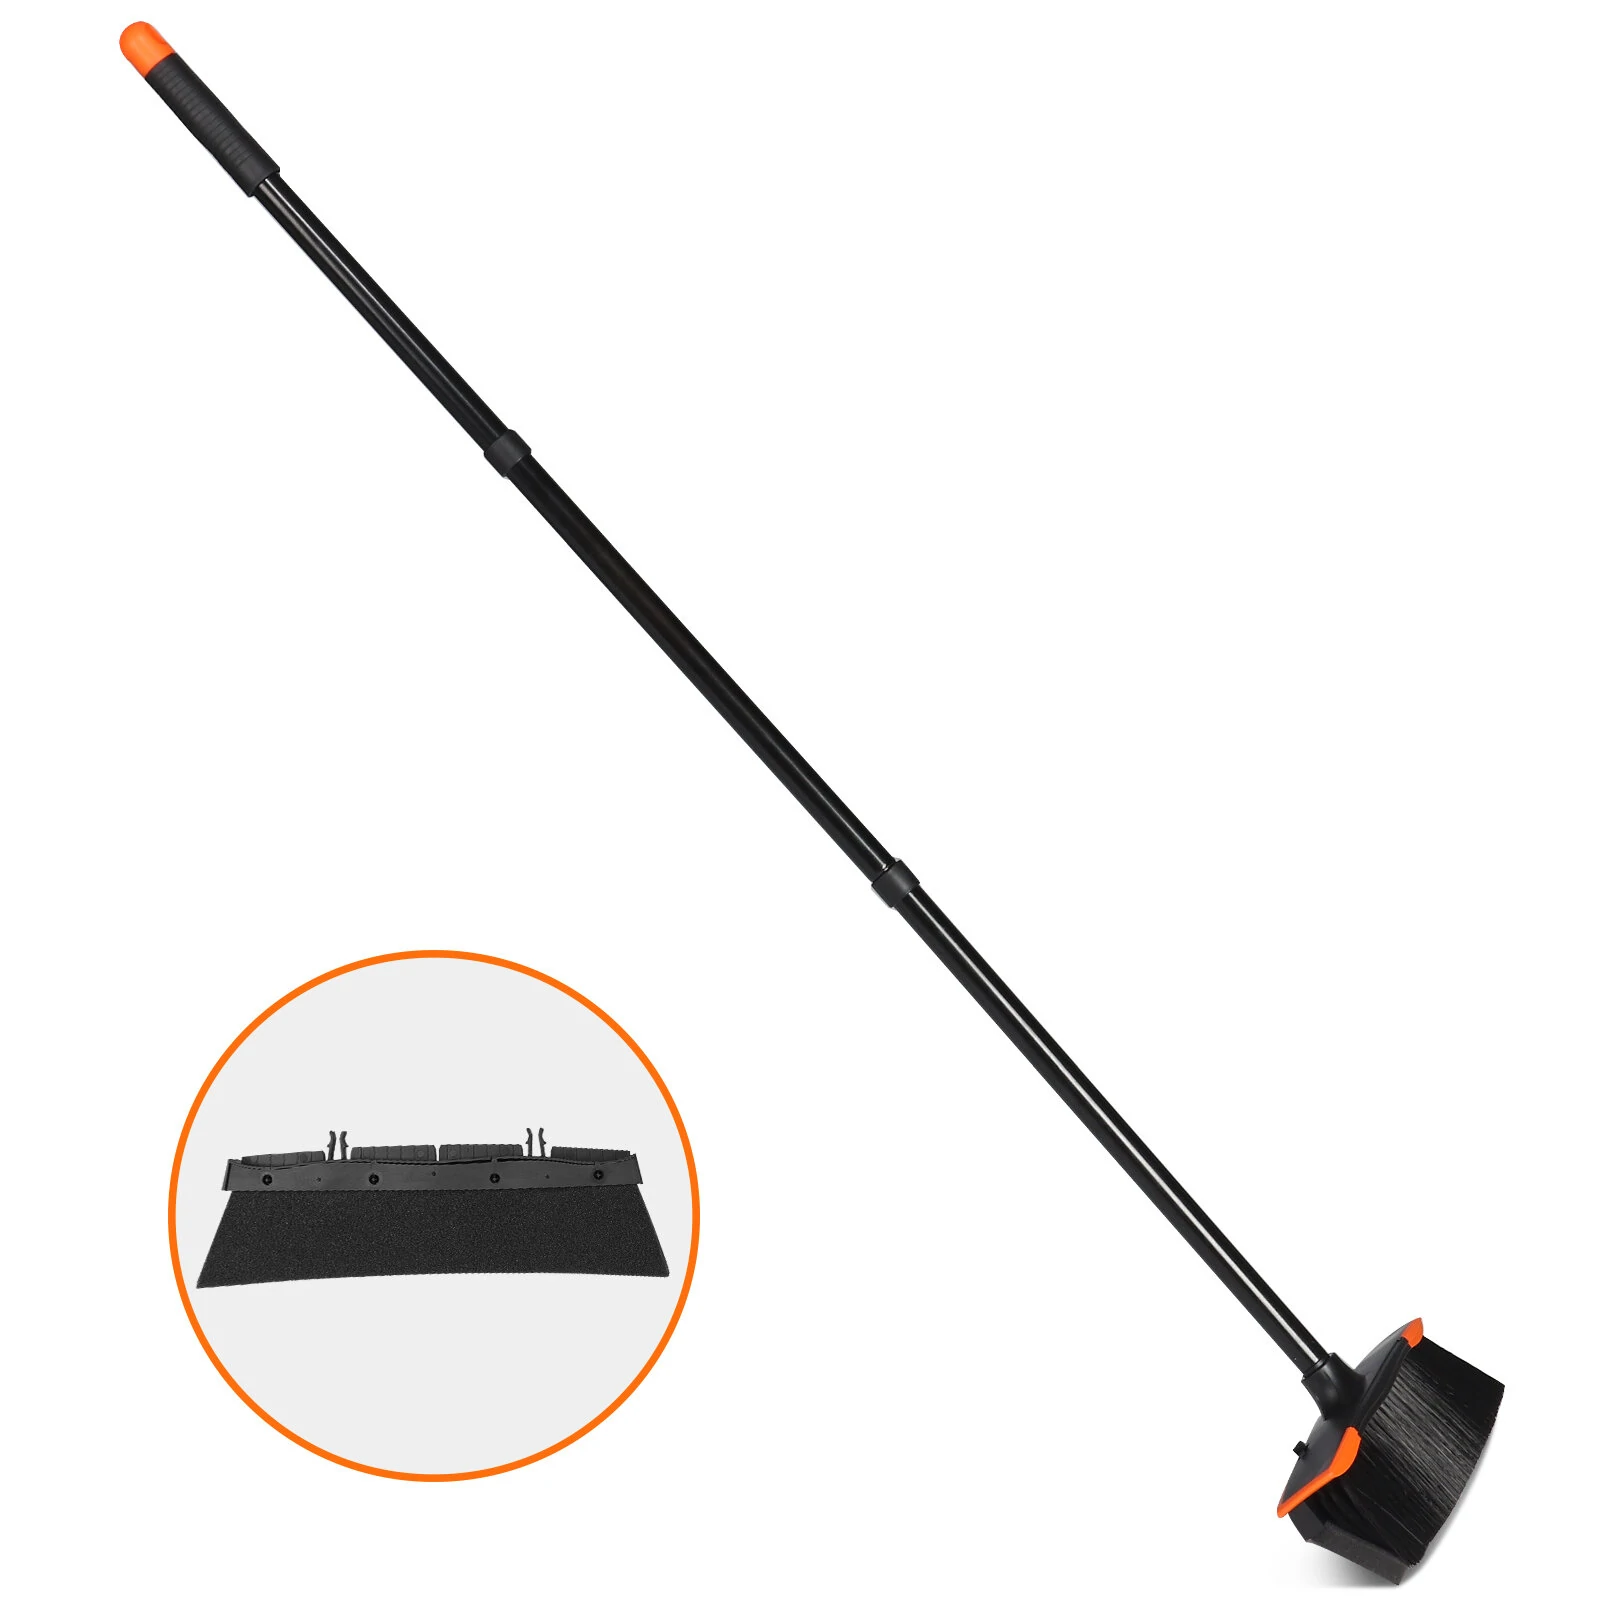 Dual-action angle telescopic broom 2-in-1 no flying dust broom movable washable broom